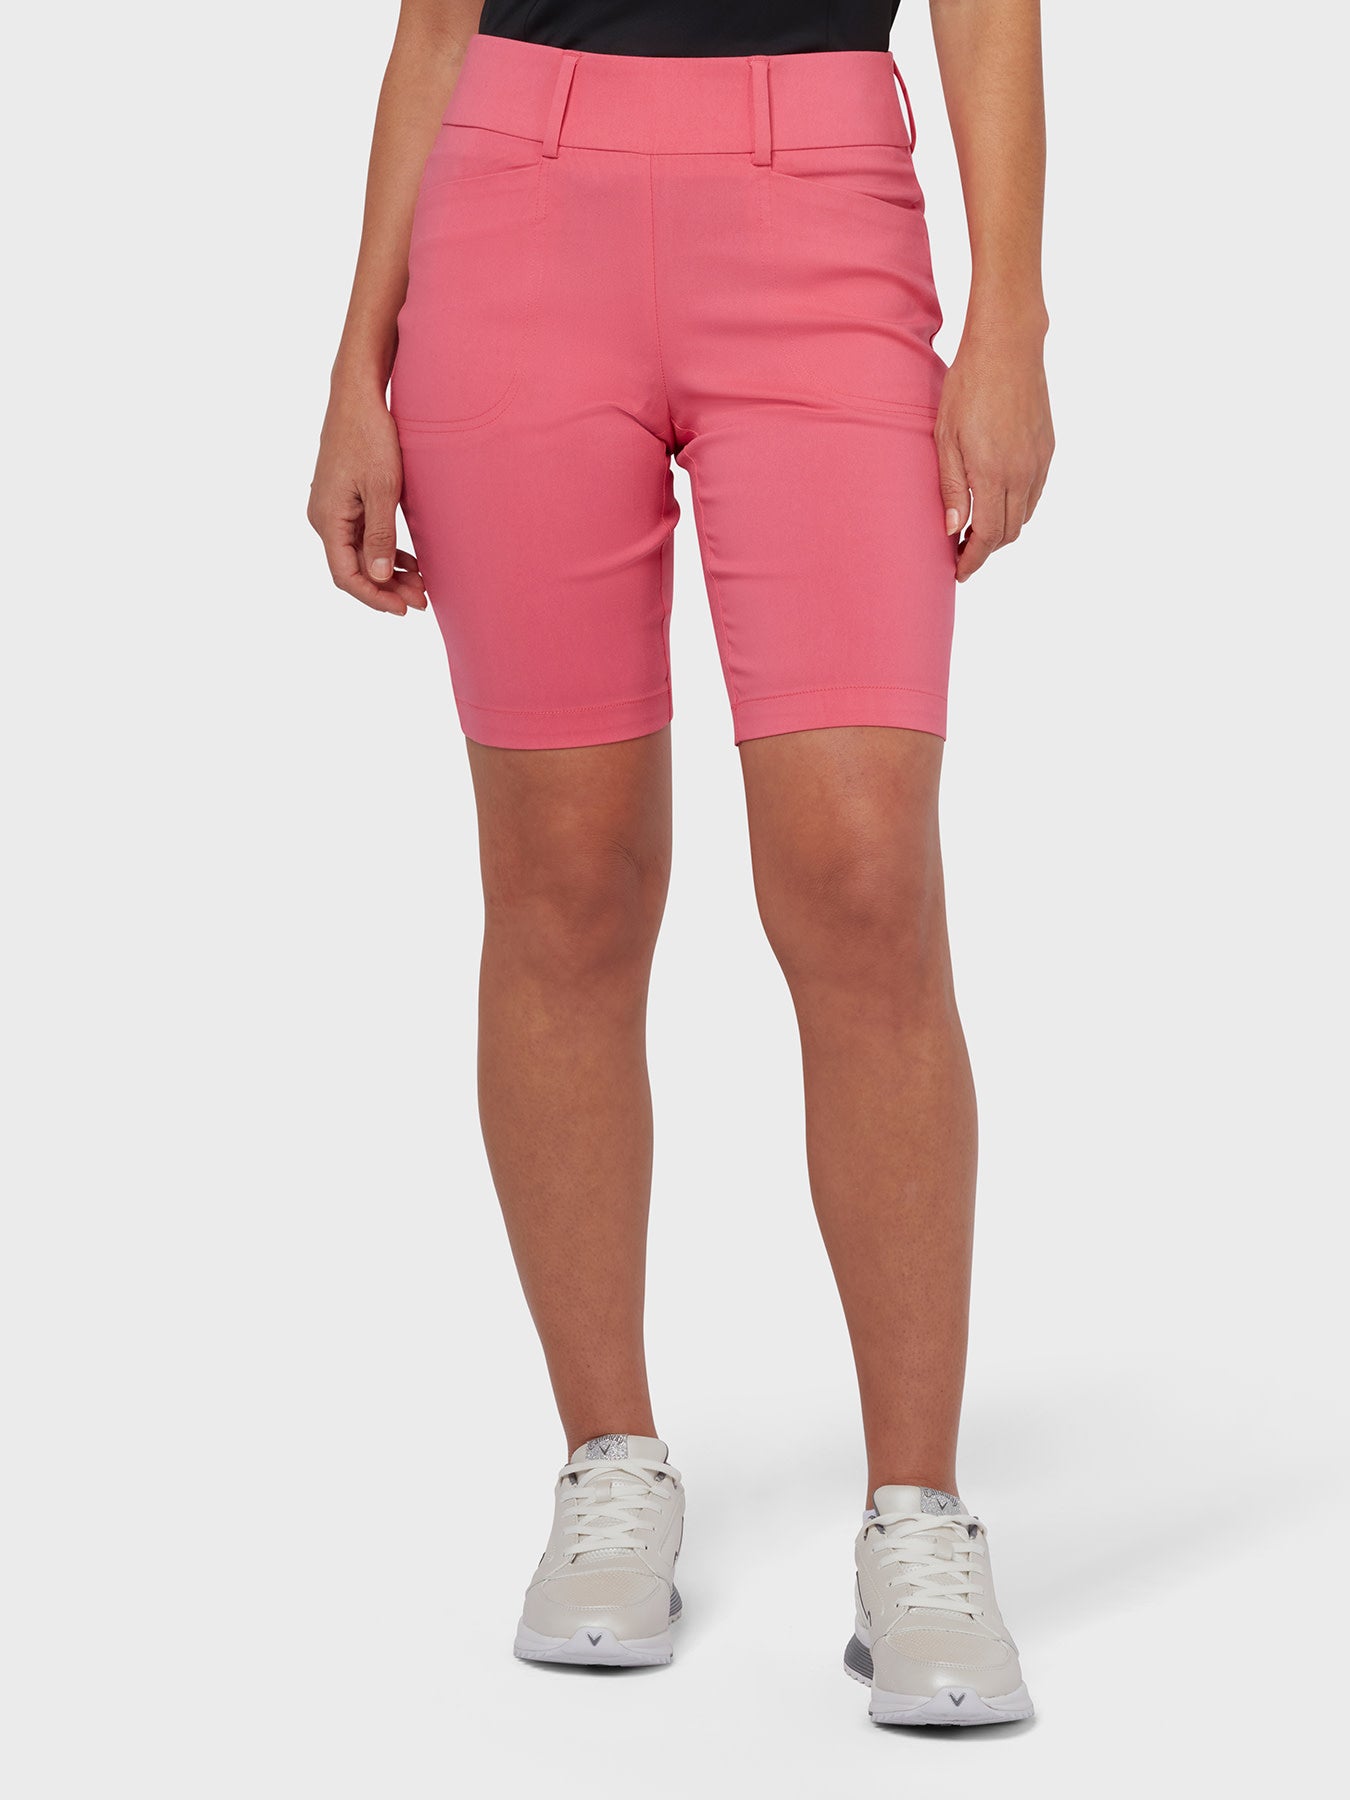 View Truesculpt Stretch Womens Shorts In Fruit Dove Fruit Dove XS information